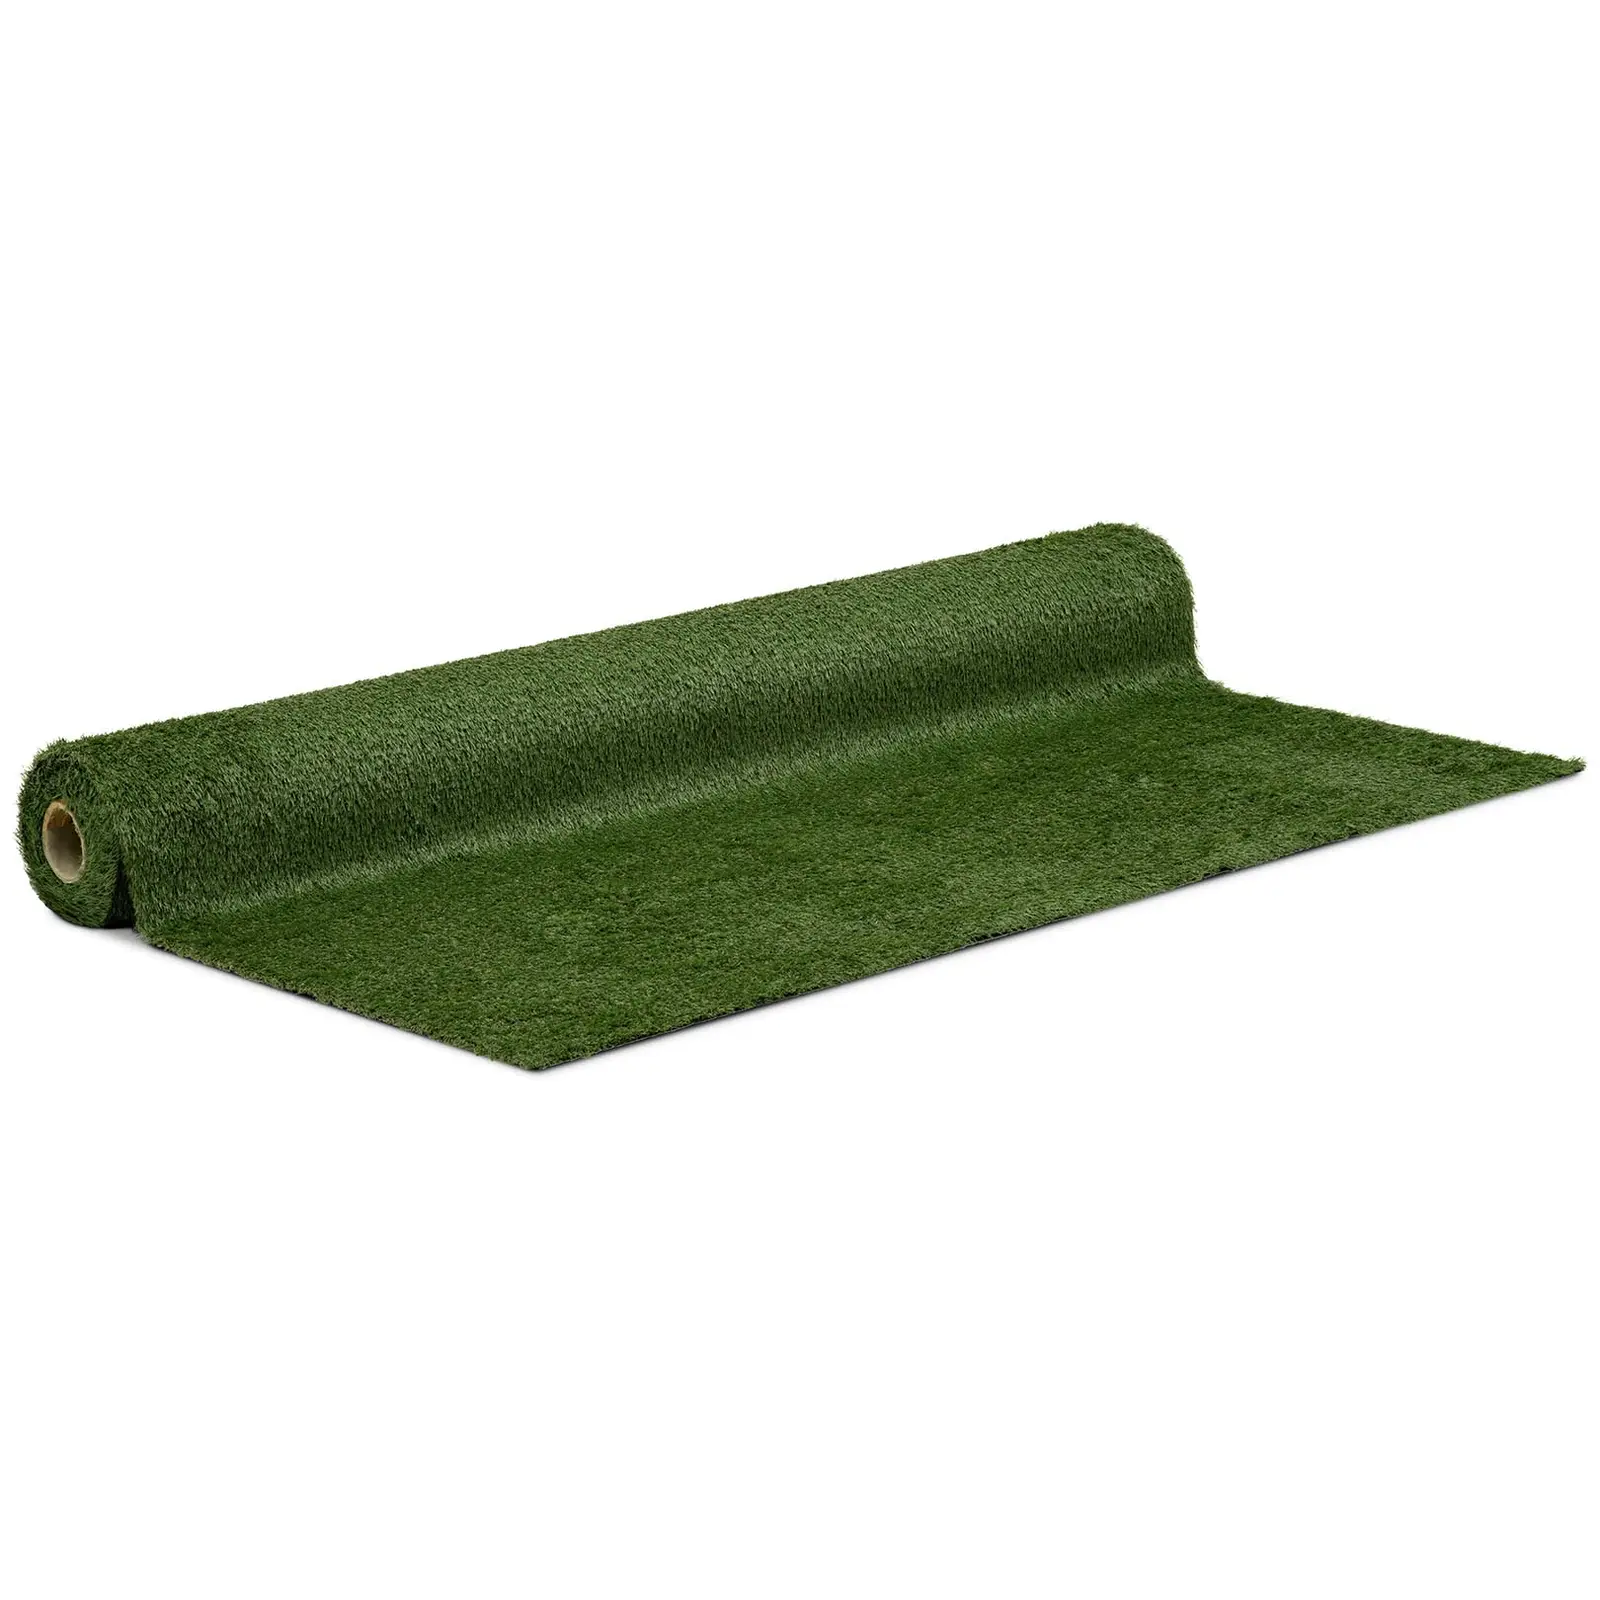 Artificial grass - 200 x 1000 cm - Height: 30 mm - Stitch rate: 14/10 cm - UV-resistant